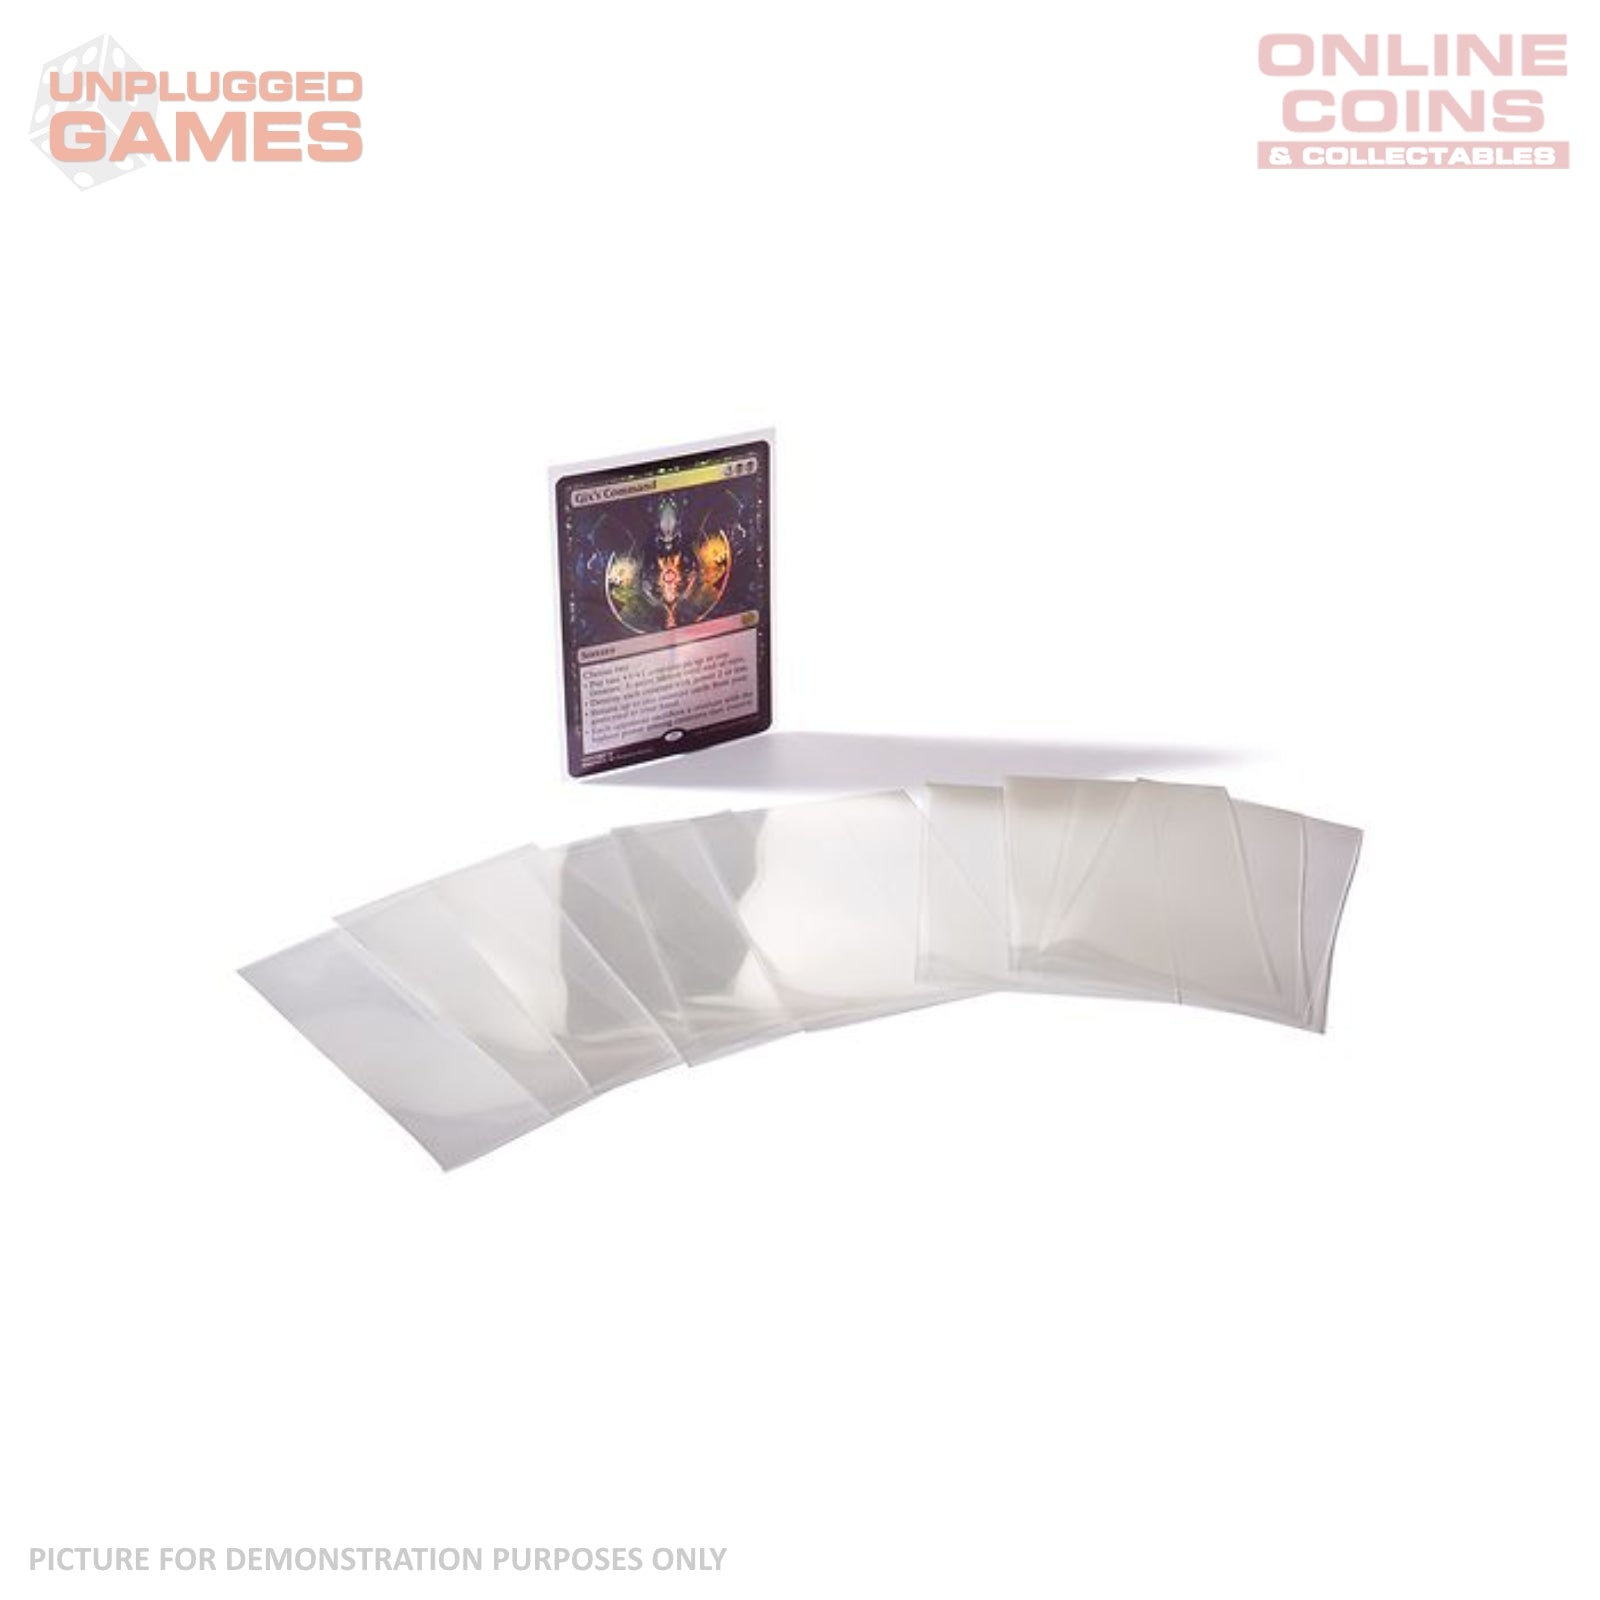 Lighthouse TCG Sleeves Pro 67x92 mm, clear, pack 100 (Standard size)